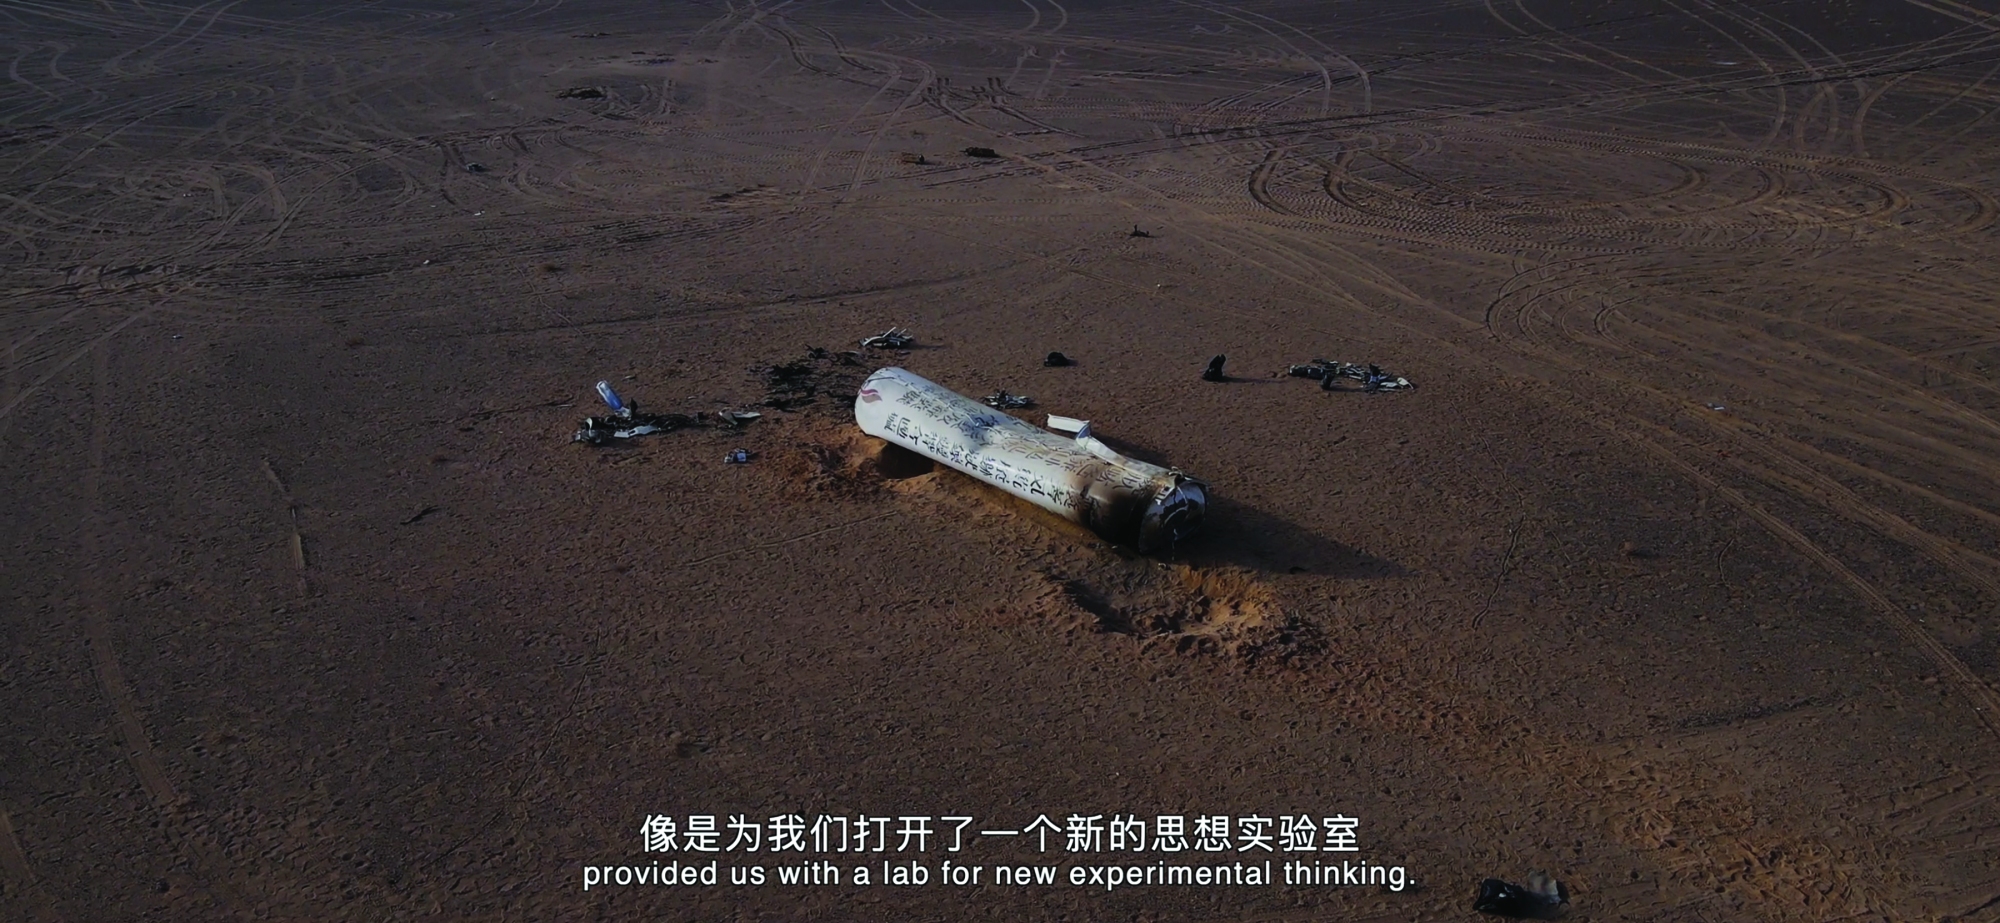 A large tubular white rocket with fake Chinese characteres printed on it has crashed into a vast desert and left an indent.